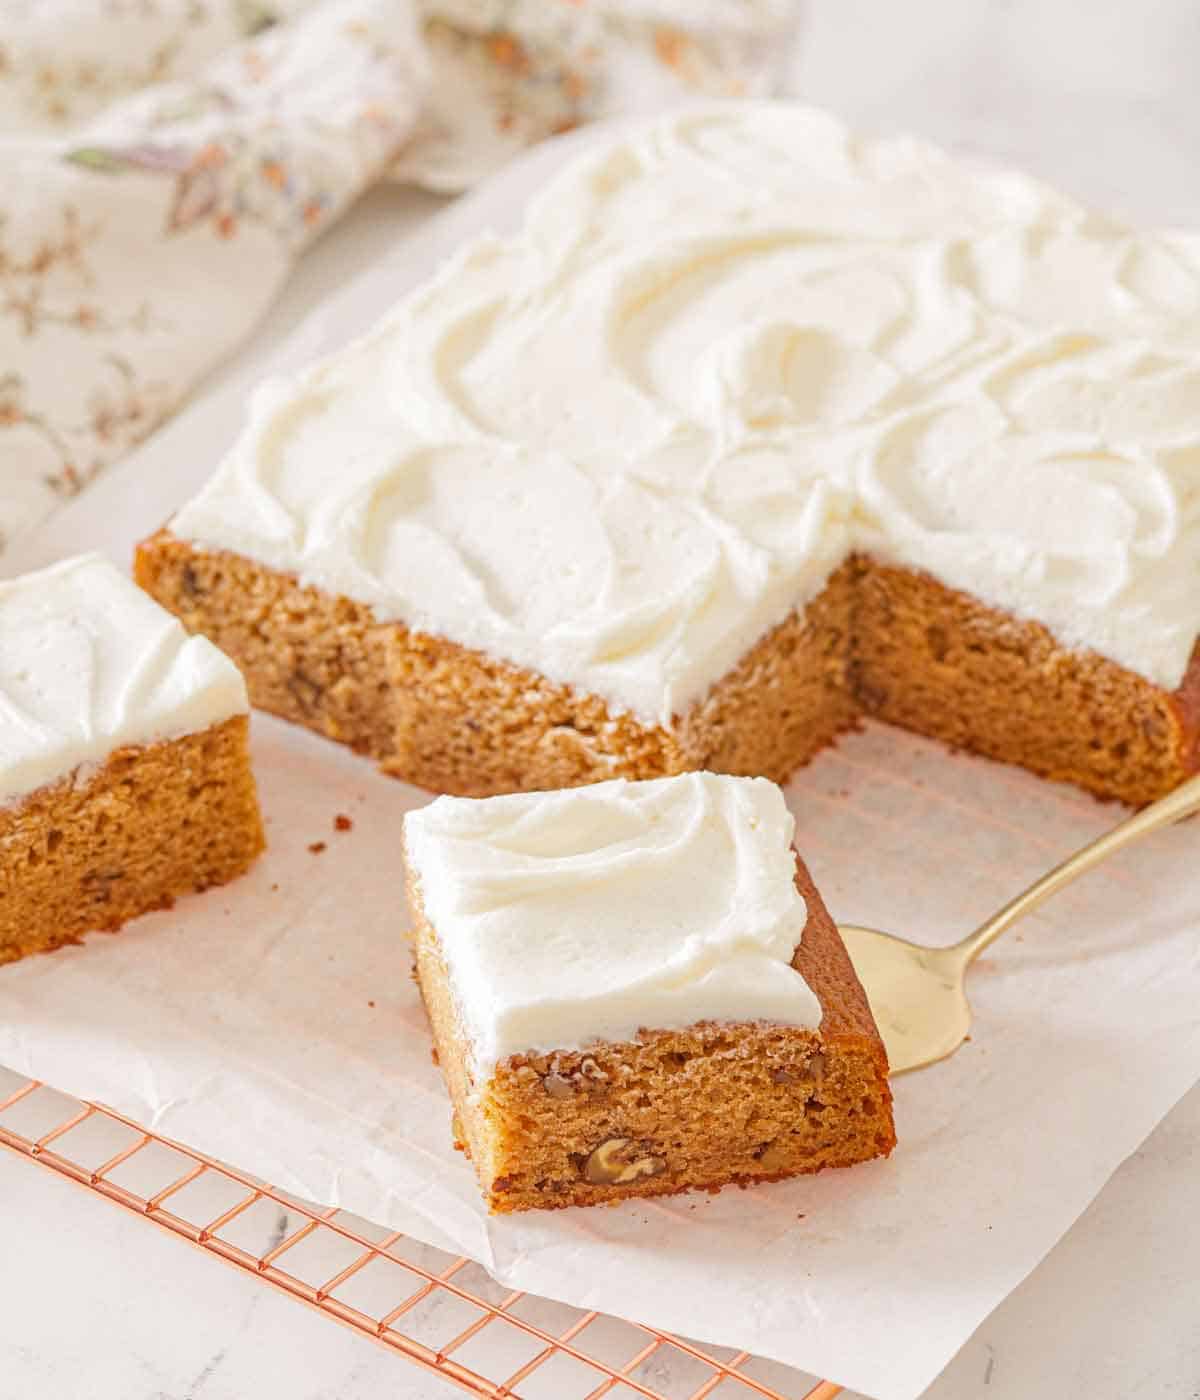 An applesauce cake with a few slices cut with one slice pulled forward with a cake spatula.